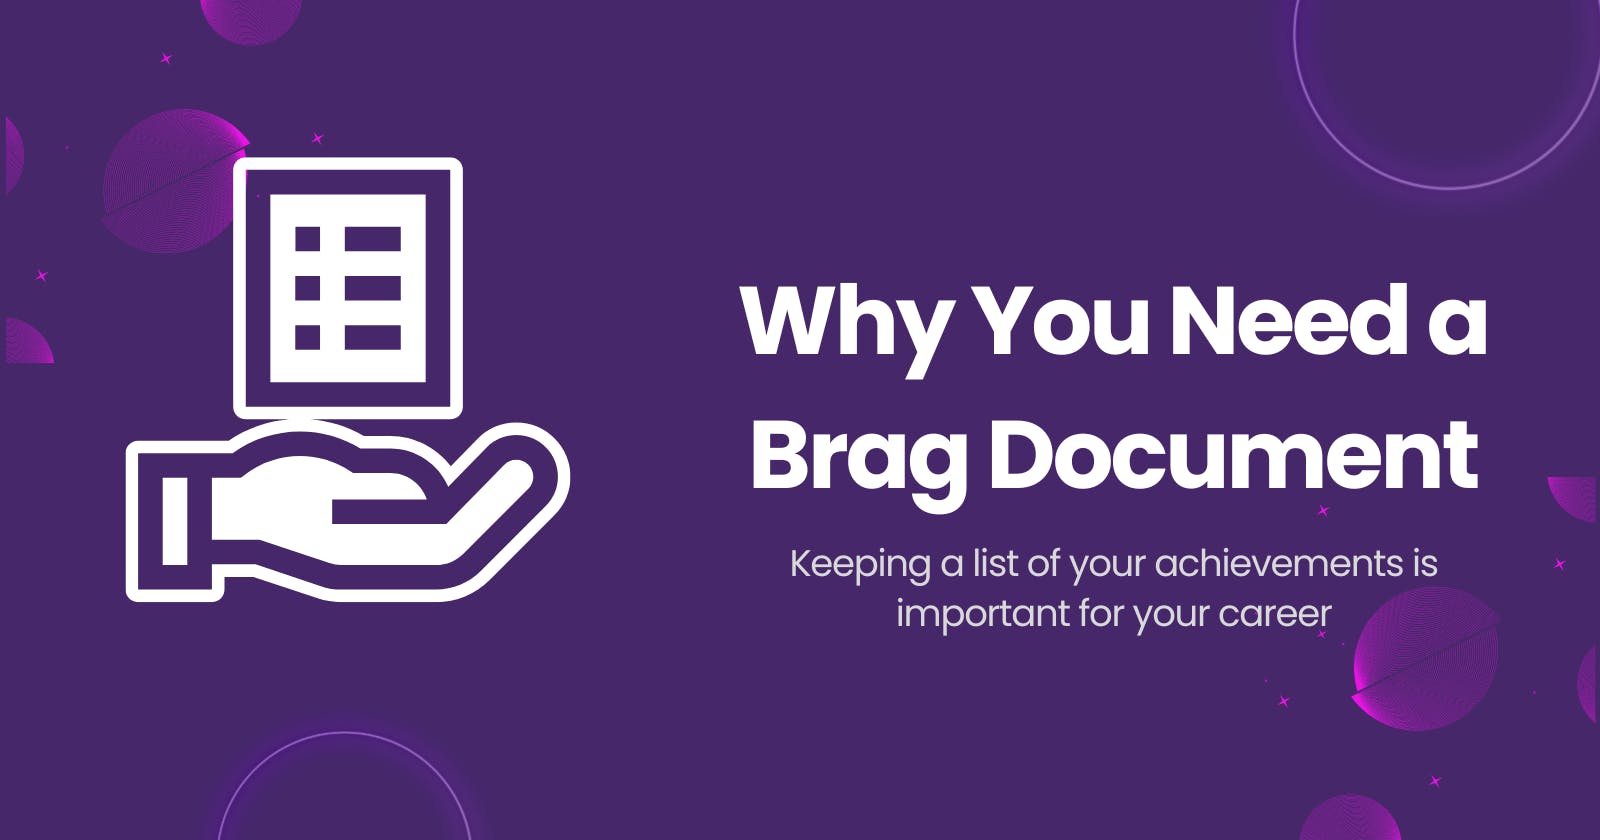 Why You Need a Brag Document